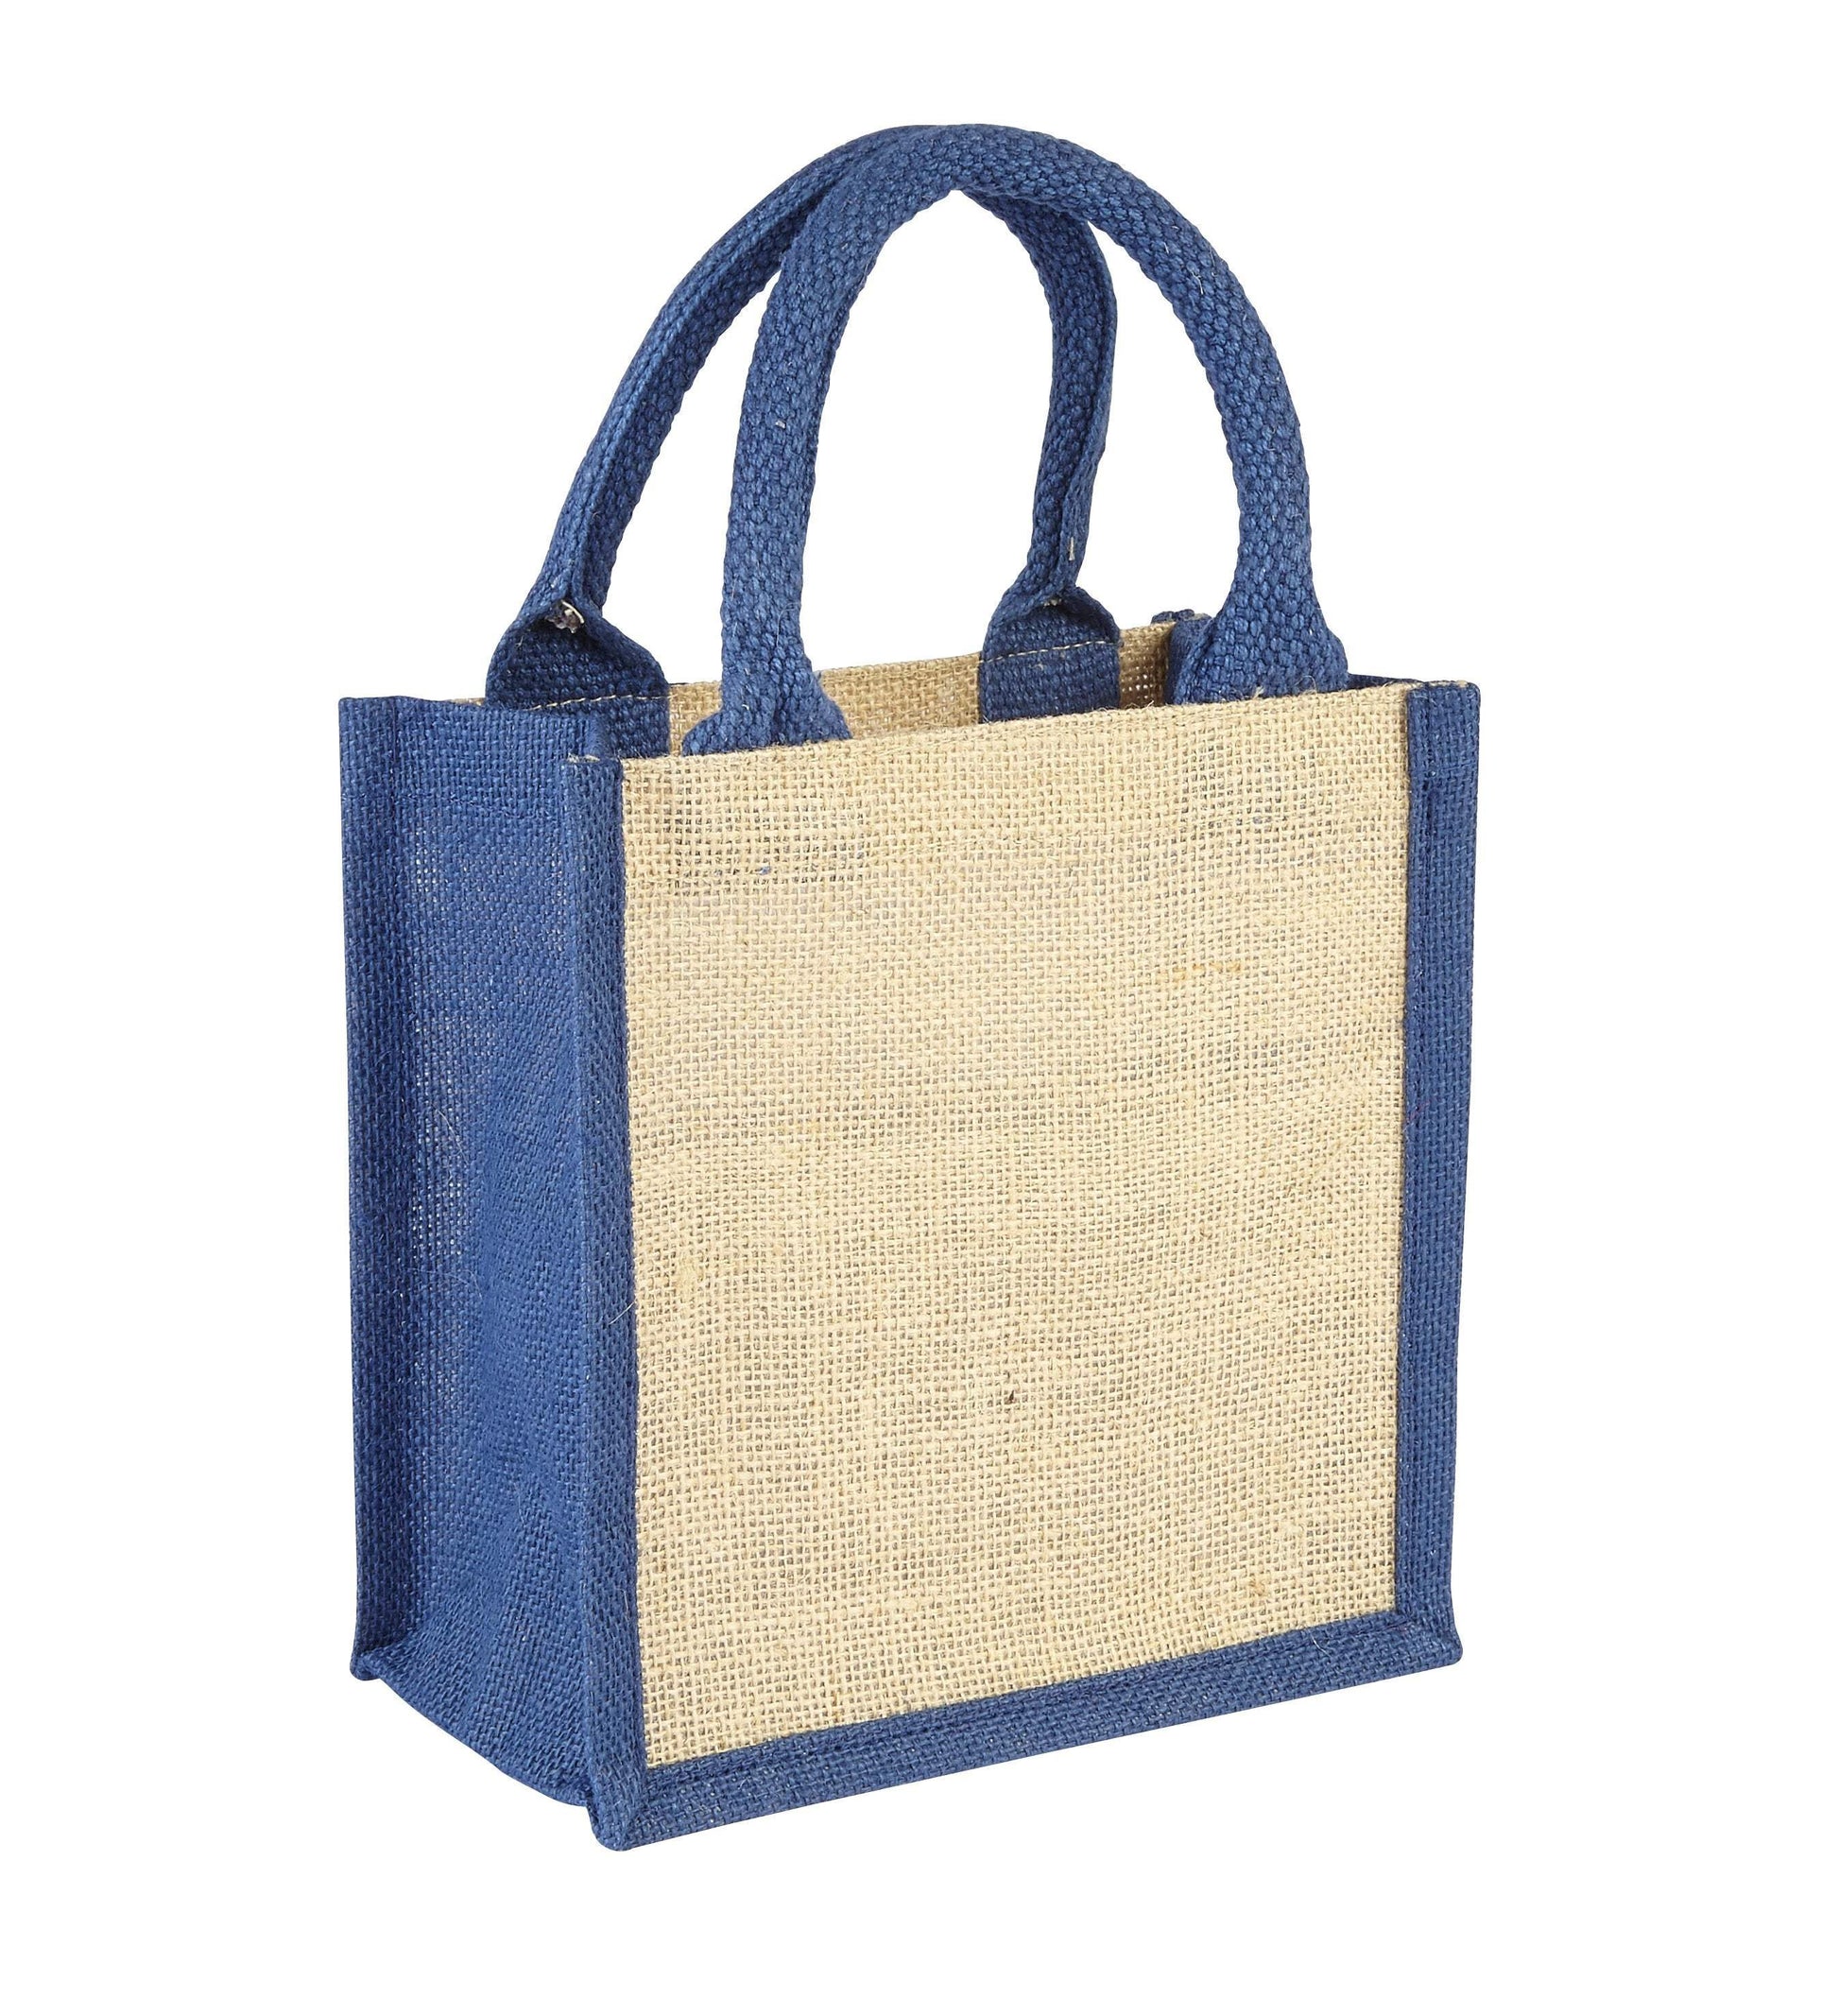 Anson Jute bag - Promotions Only Group Limited